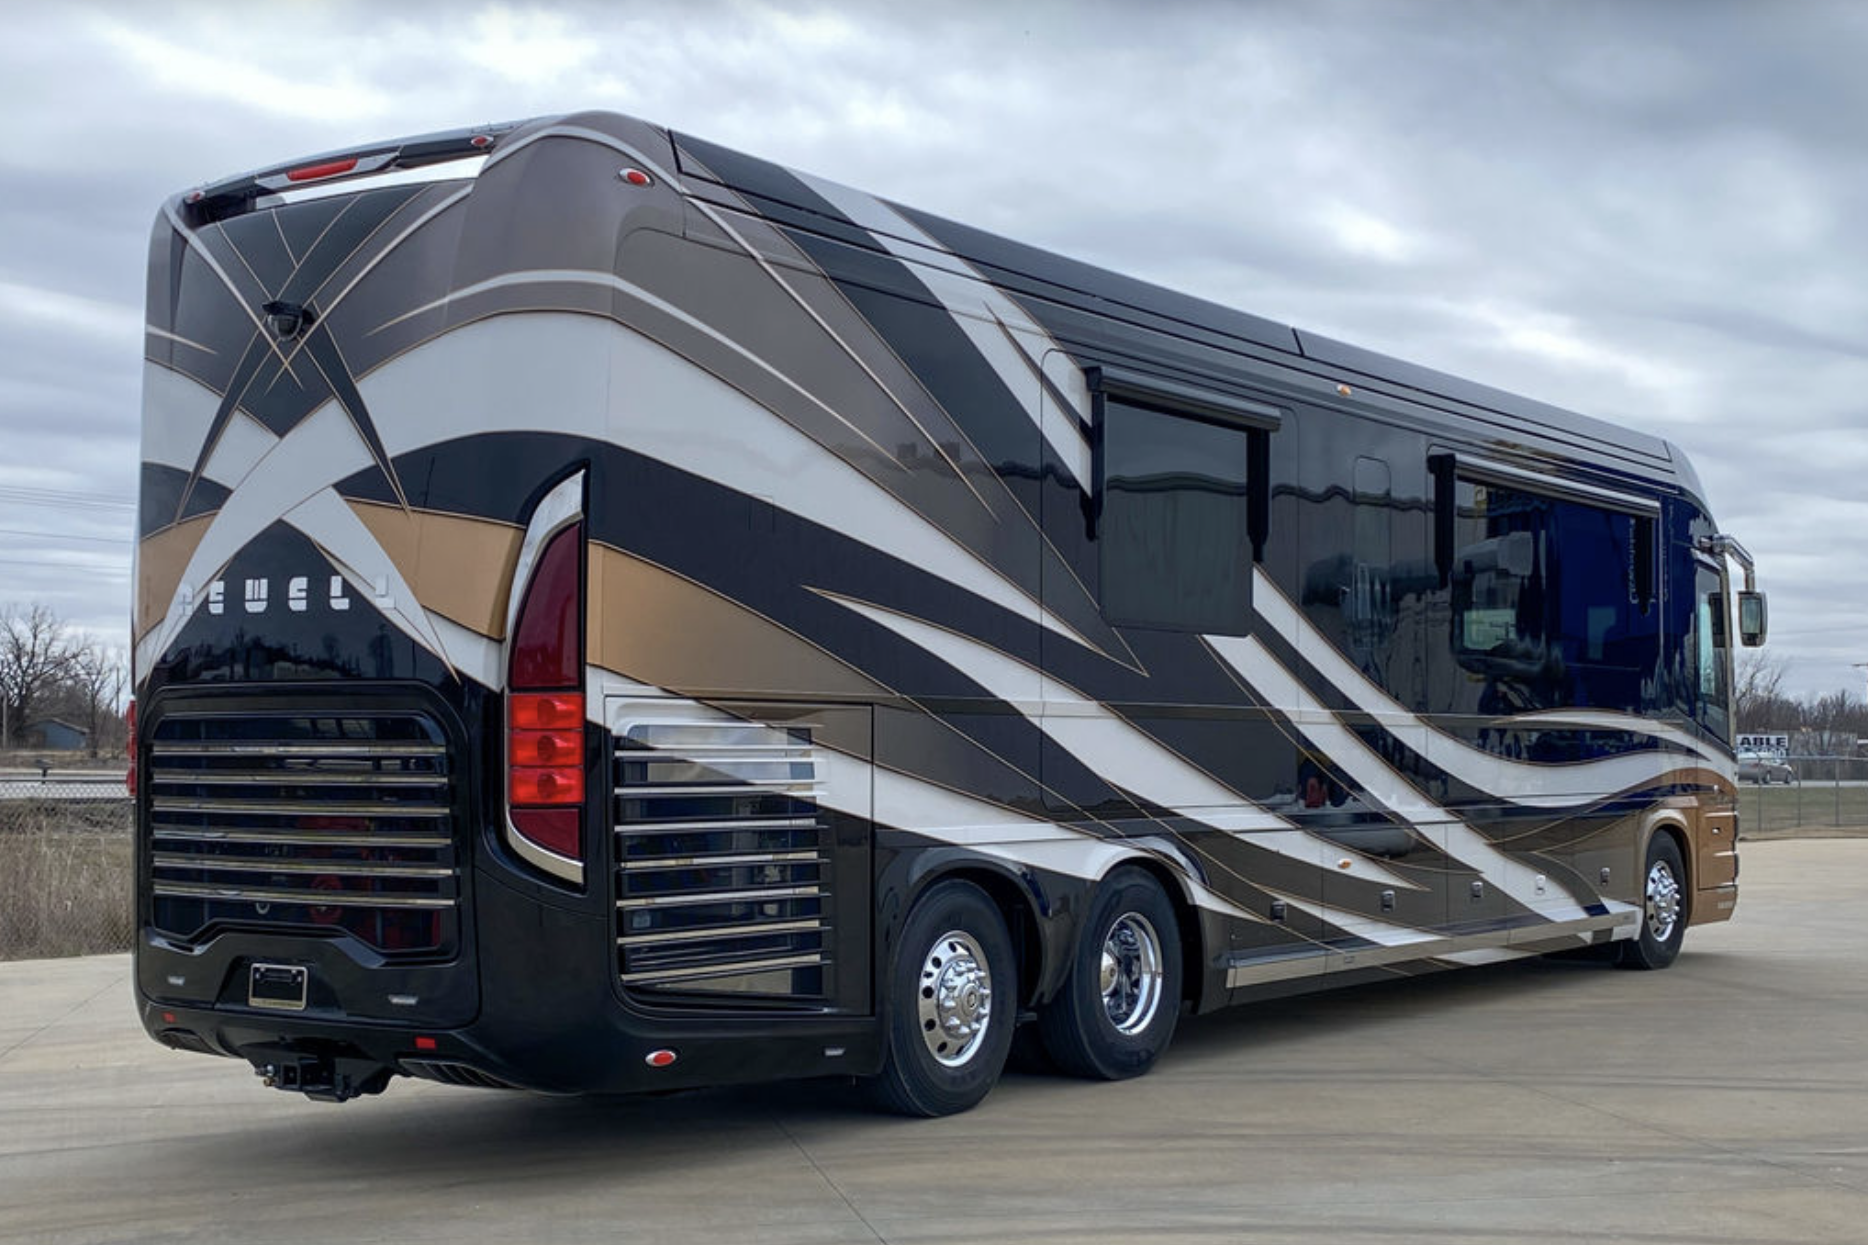 <p><strong>Price:</strong> Some models start at around $2.1 million <br>Newell's motorhomes use custom-engineered bodies and chassis, meaning they’re not conversions, but built from the ground up to be a luxury motorhome. <a href="https://www.newellcoach.com/new-motorhome-coach-for-sale--xNewInventory">Newell's p50</a> — the name is a nod to the company's 50th anniversary — is a collaboration with longtime partner Porsche Design.</p><p><b>Related:</b> <a href="https://blog.cheapism.com/most-amazing-porsches/">20 Porsches We Dream About Driving</a></p>